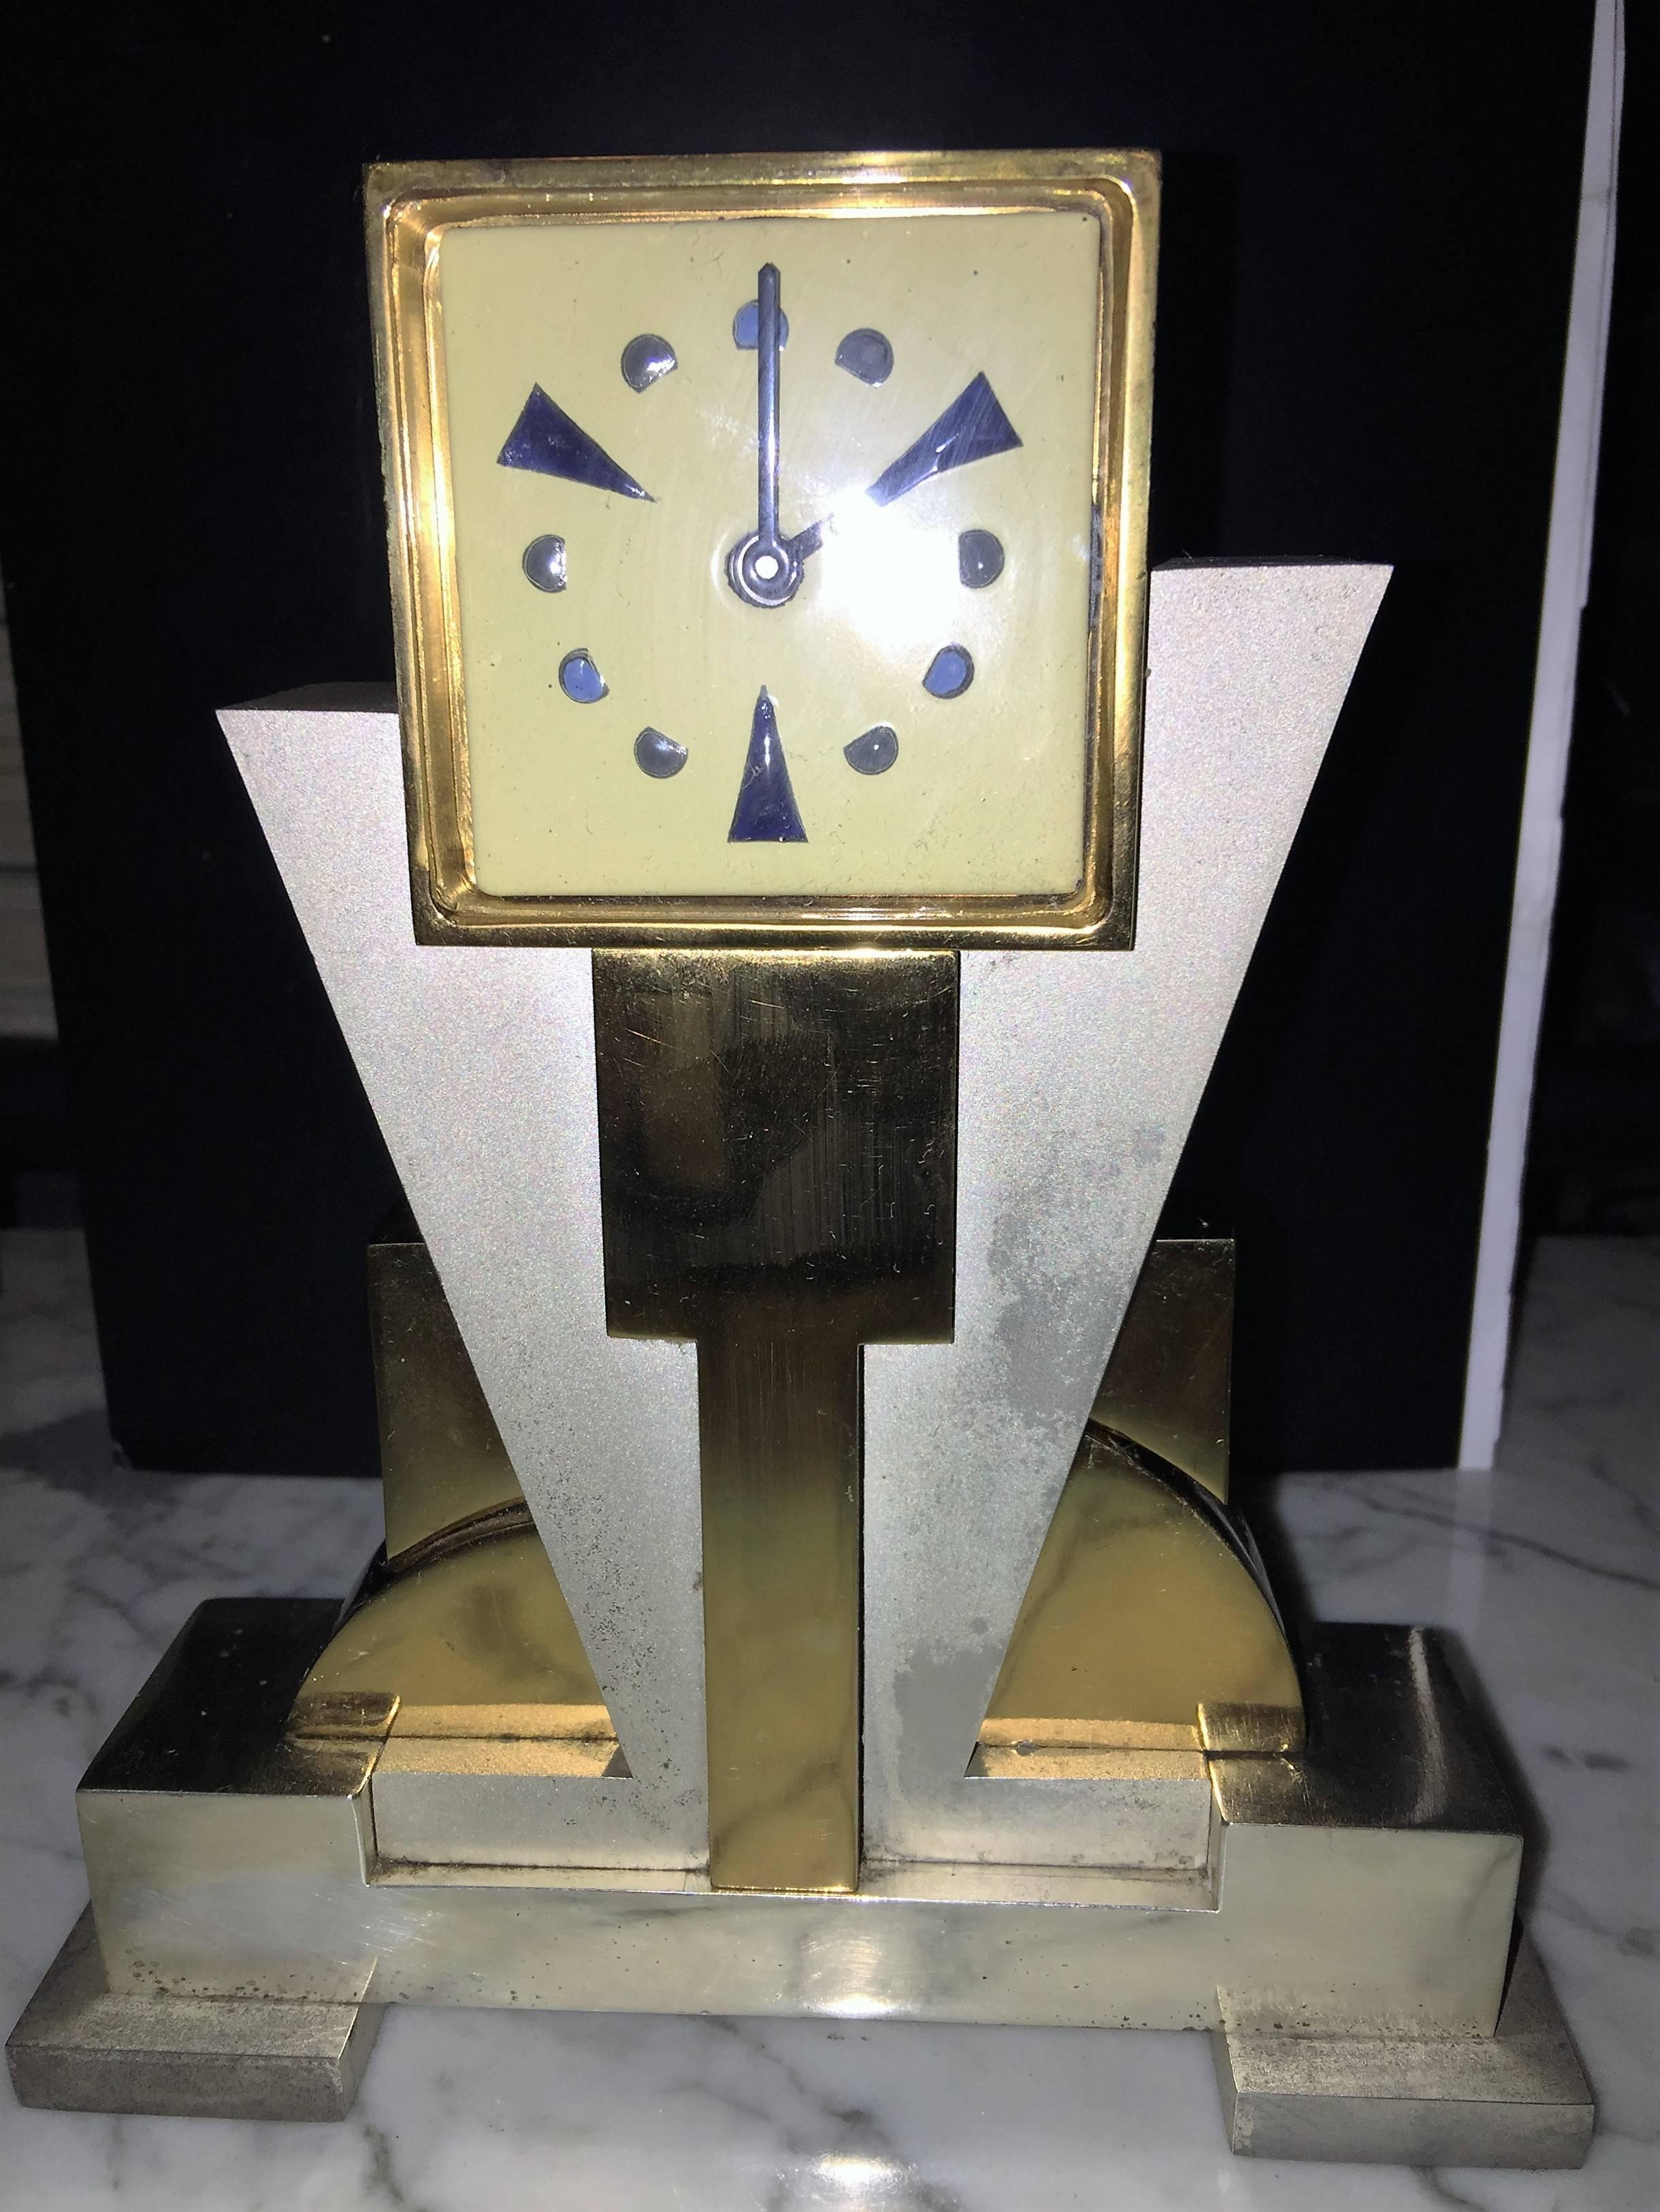 Jean Goulden: French (1878-1946) famous for his expertise with Champleve Enamels in an Art Deco overt design, his work was very rare. His clocks sell for upward of millions, this clock is a Iicensed reproduction, circa 1990's by his son Bernard